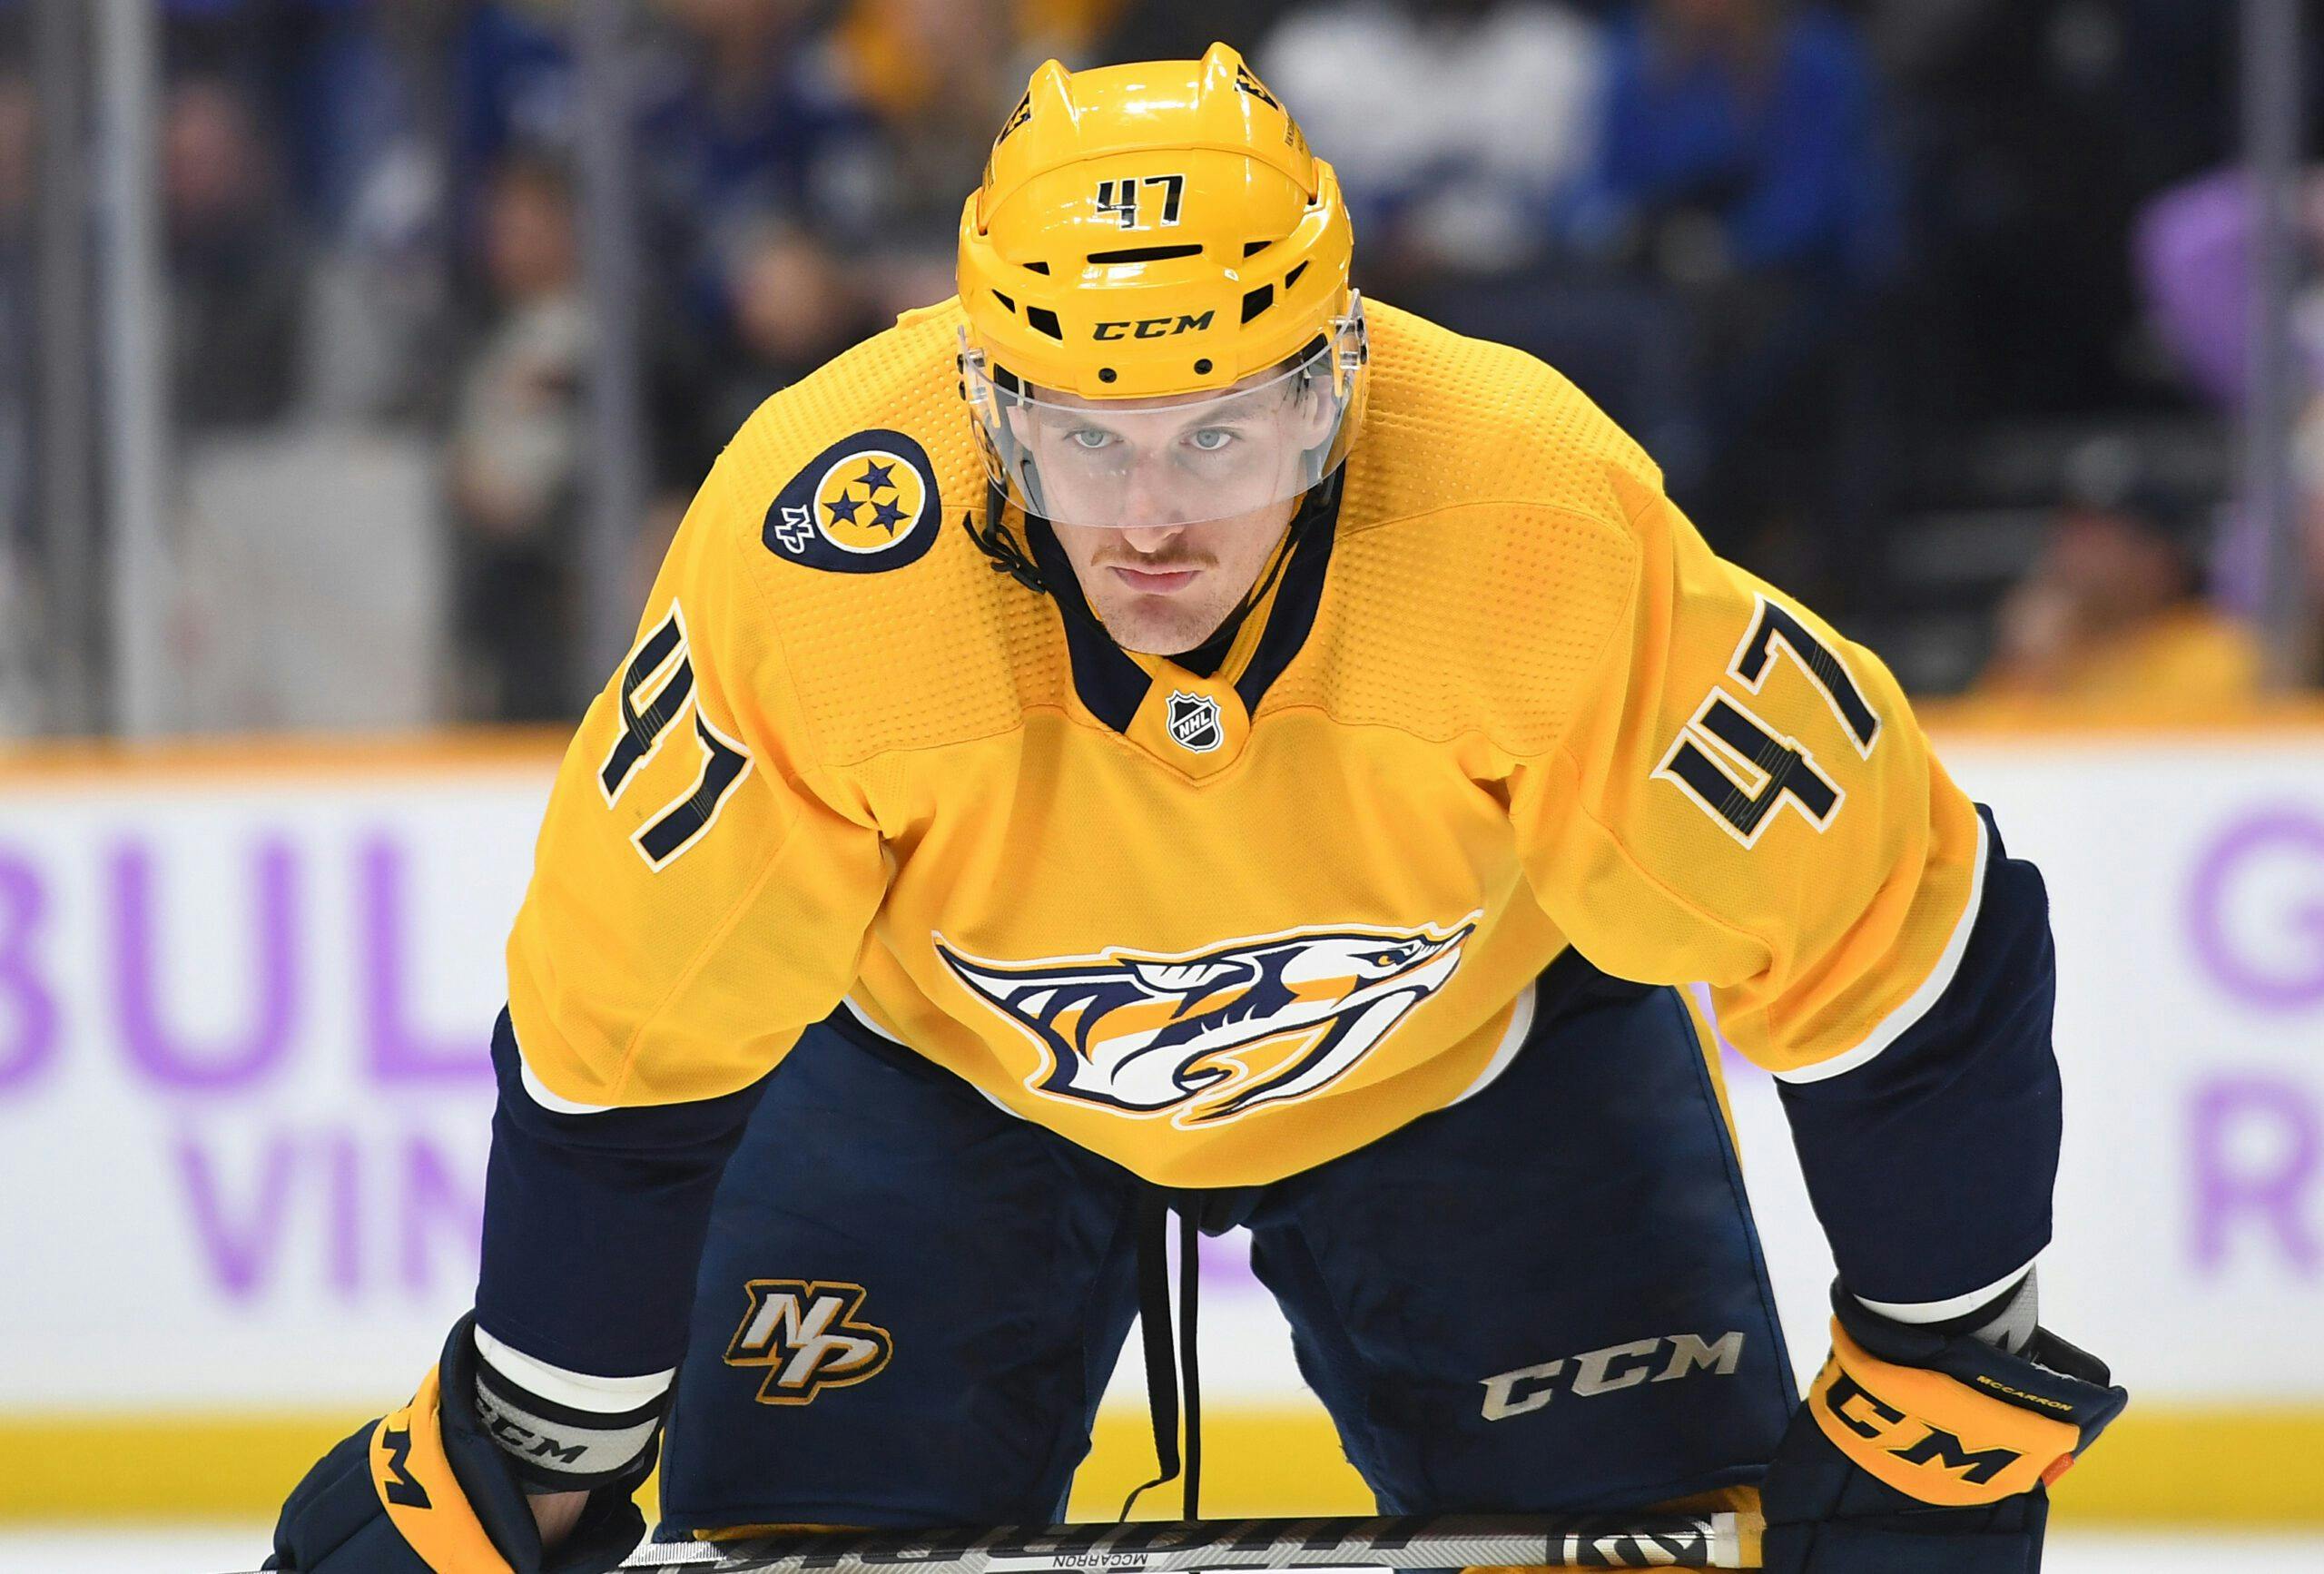 Michael McCarron reinstated by NHL, NHLPA Player Assistance Program